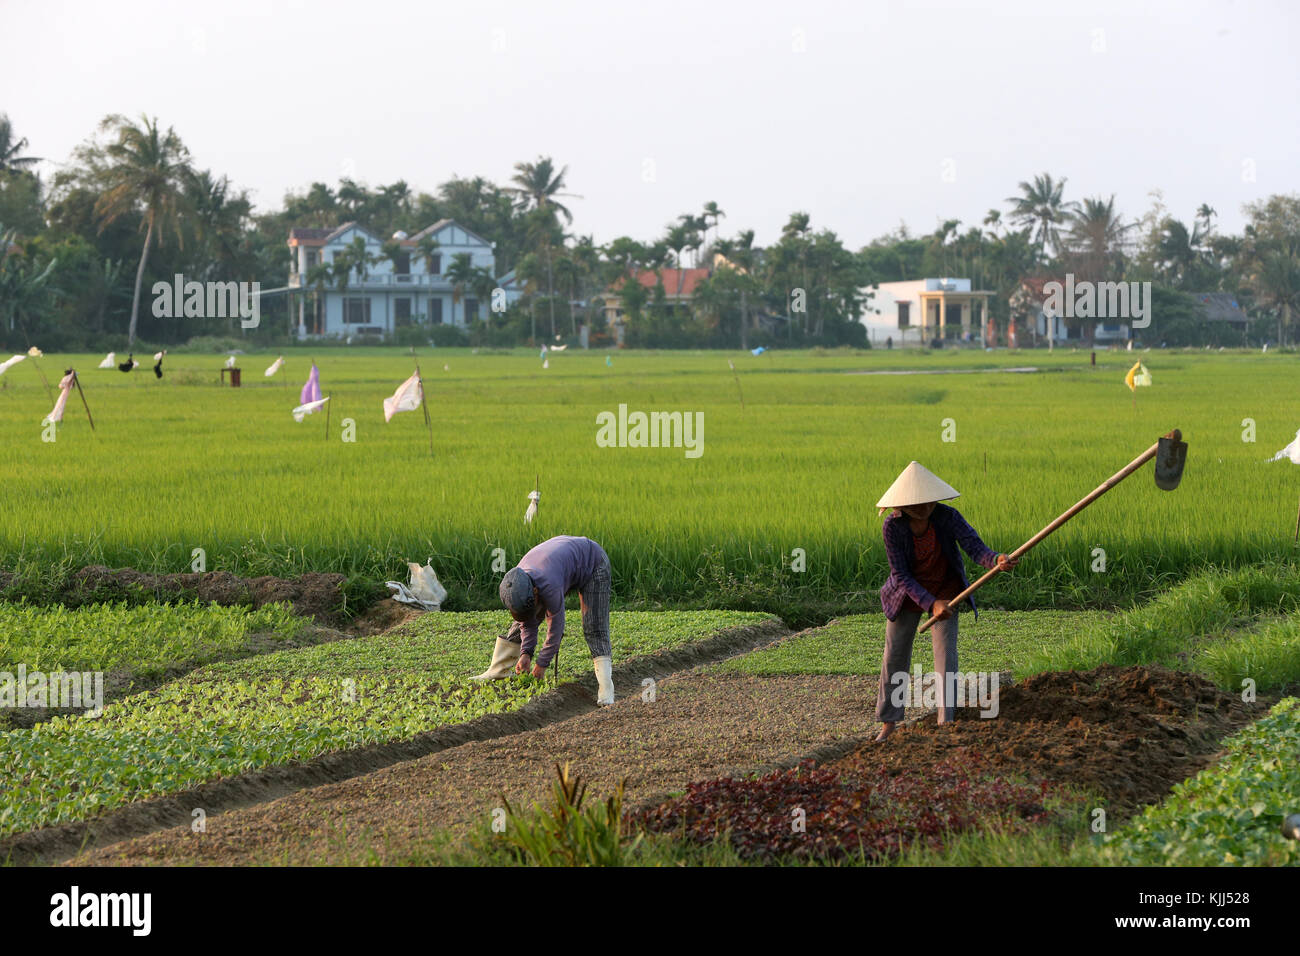 Vietnamese woman digging soil with the hoe in the vegetable field.  Hoi An. Vietnam. Stock Photo